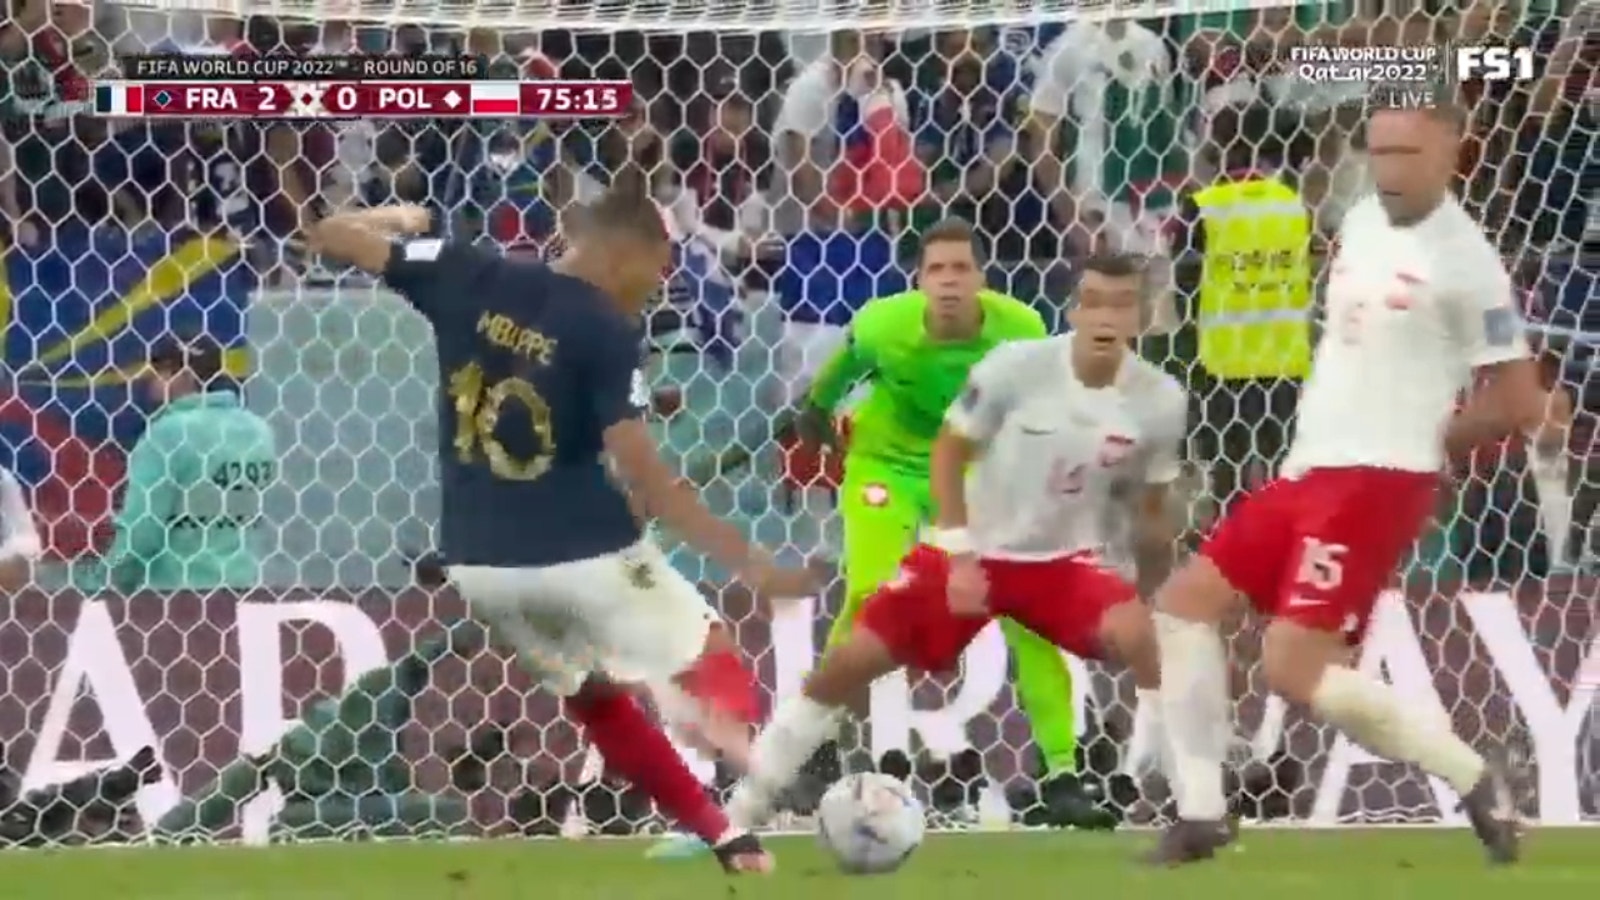 Kylian Mbappé scores to give France a 2-0 lead over Poland